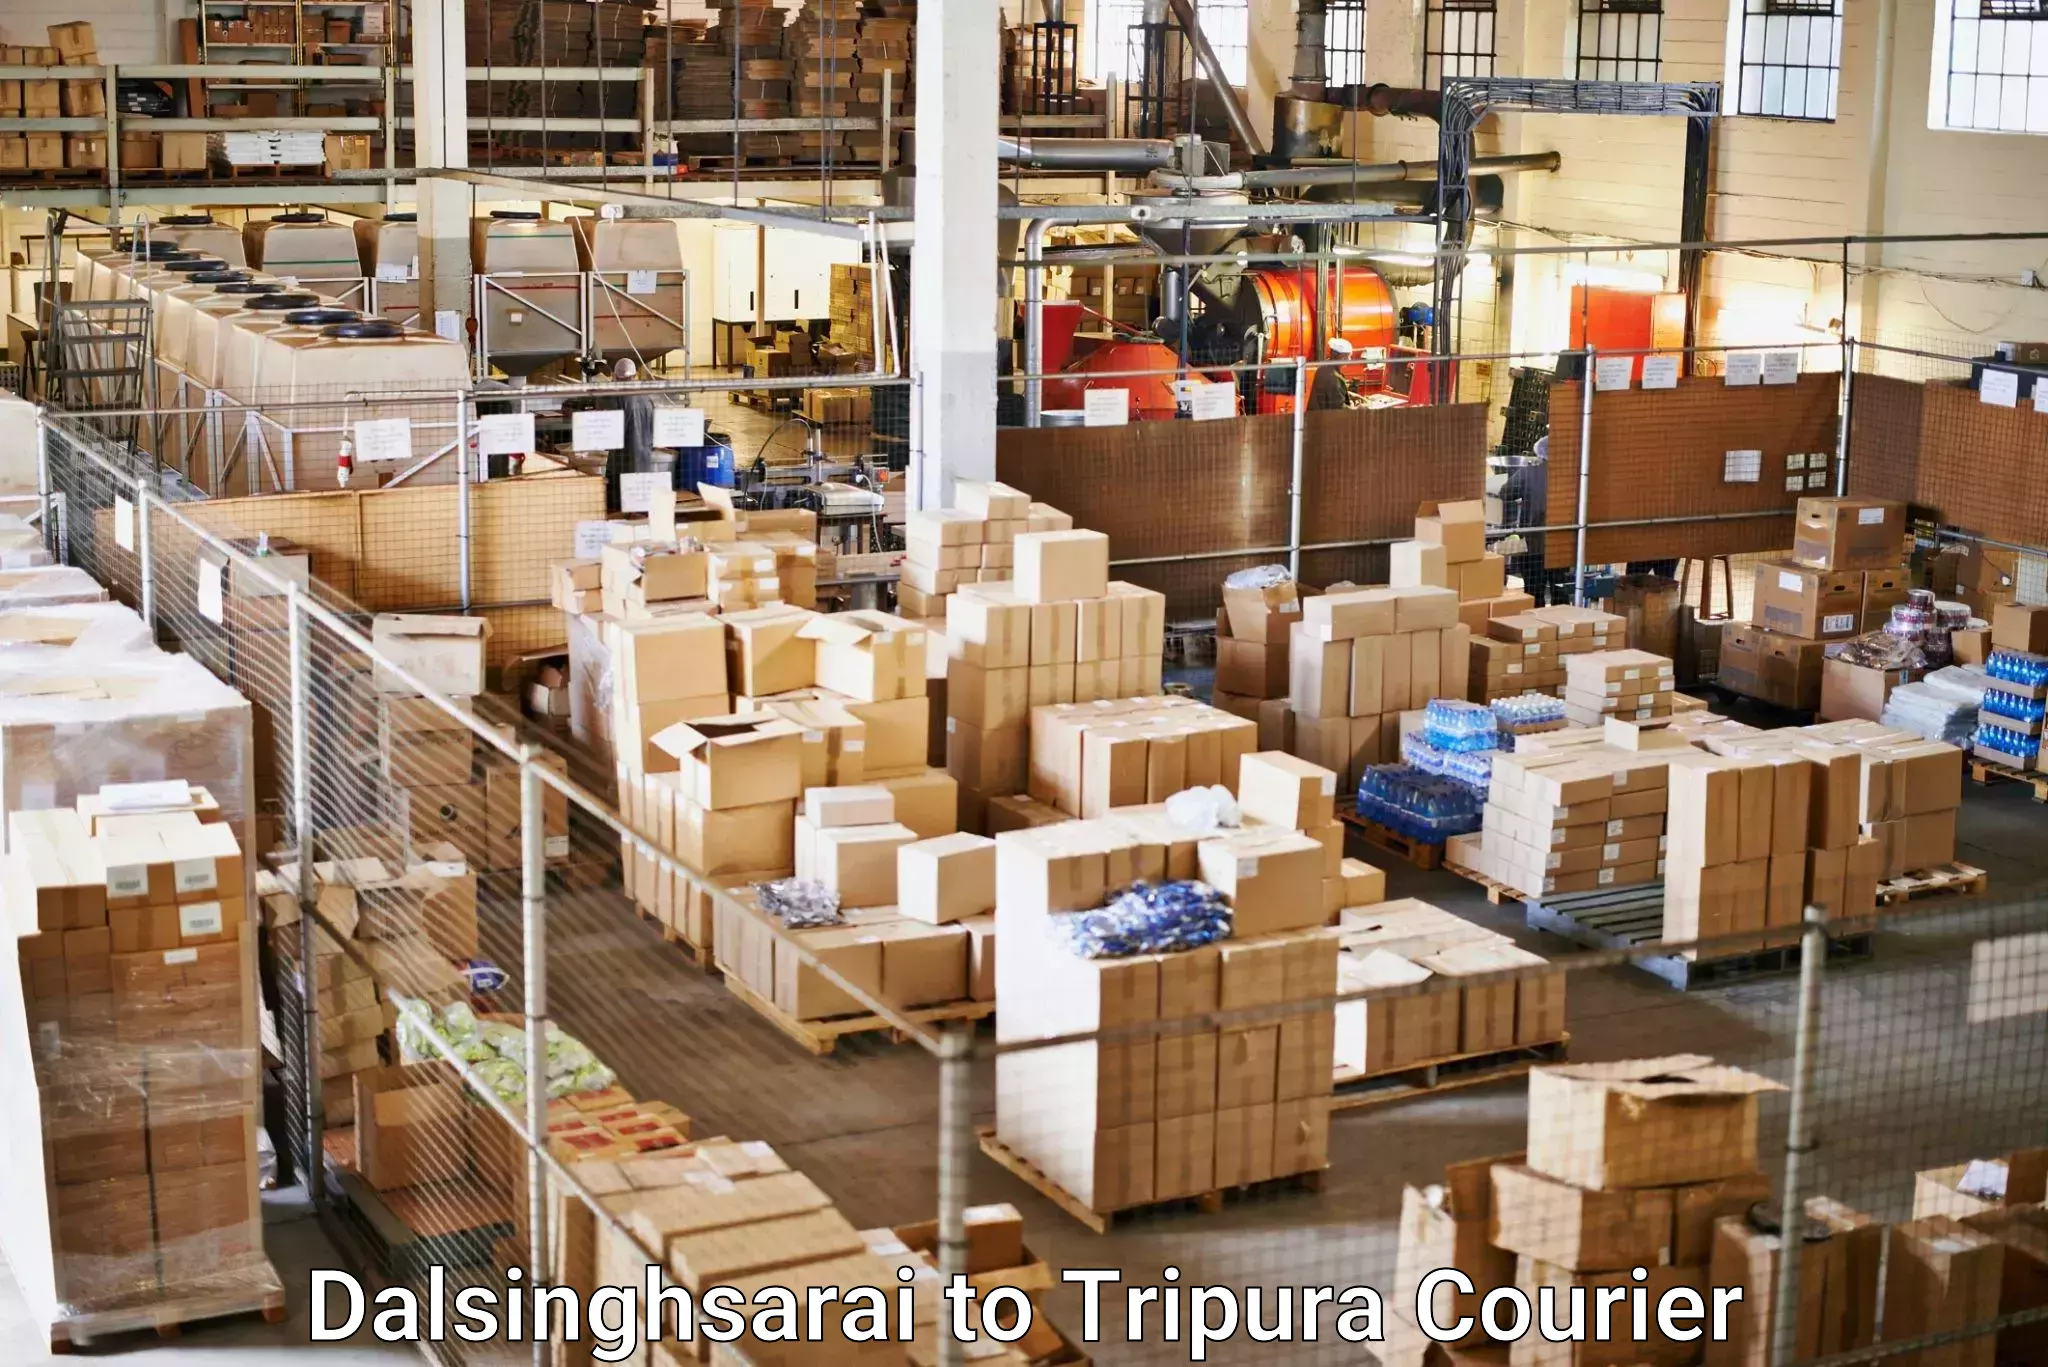 Commercial shipping rates in Dalsinghsarai to Agartala